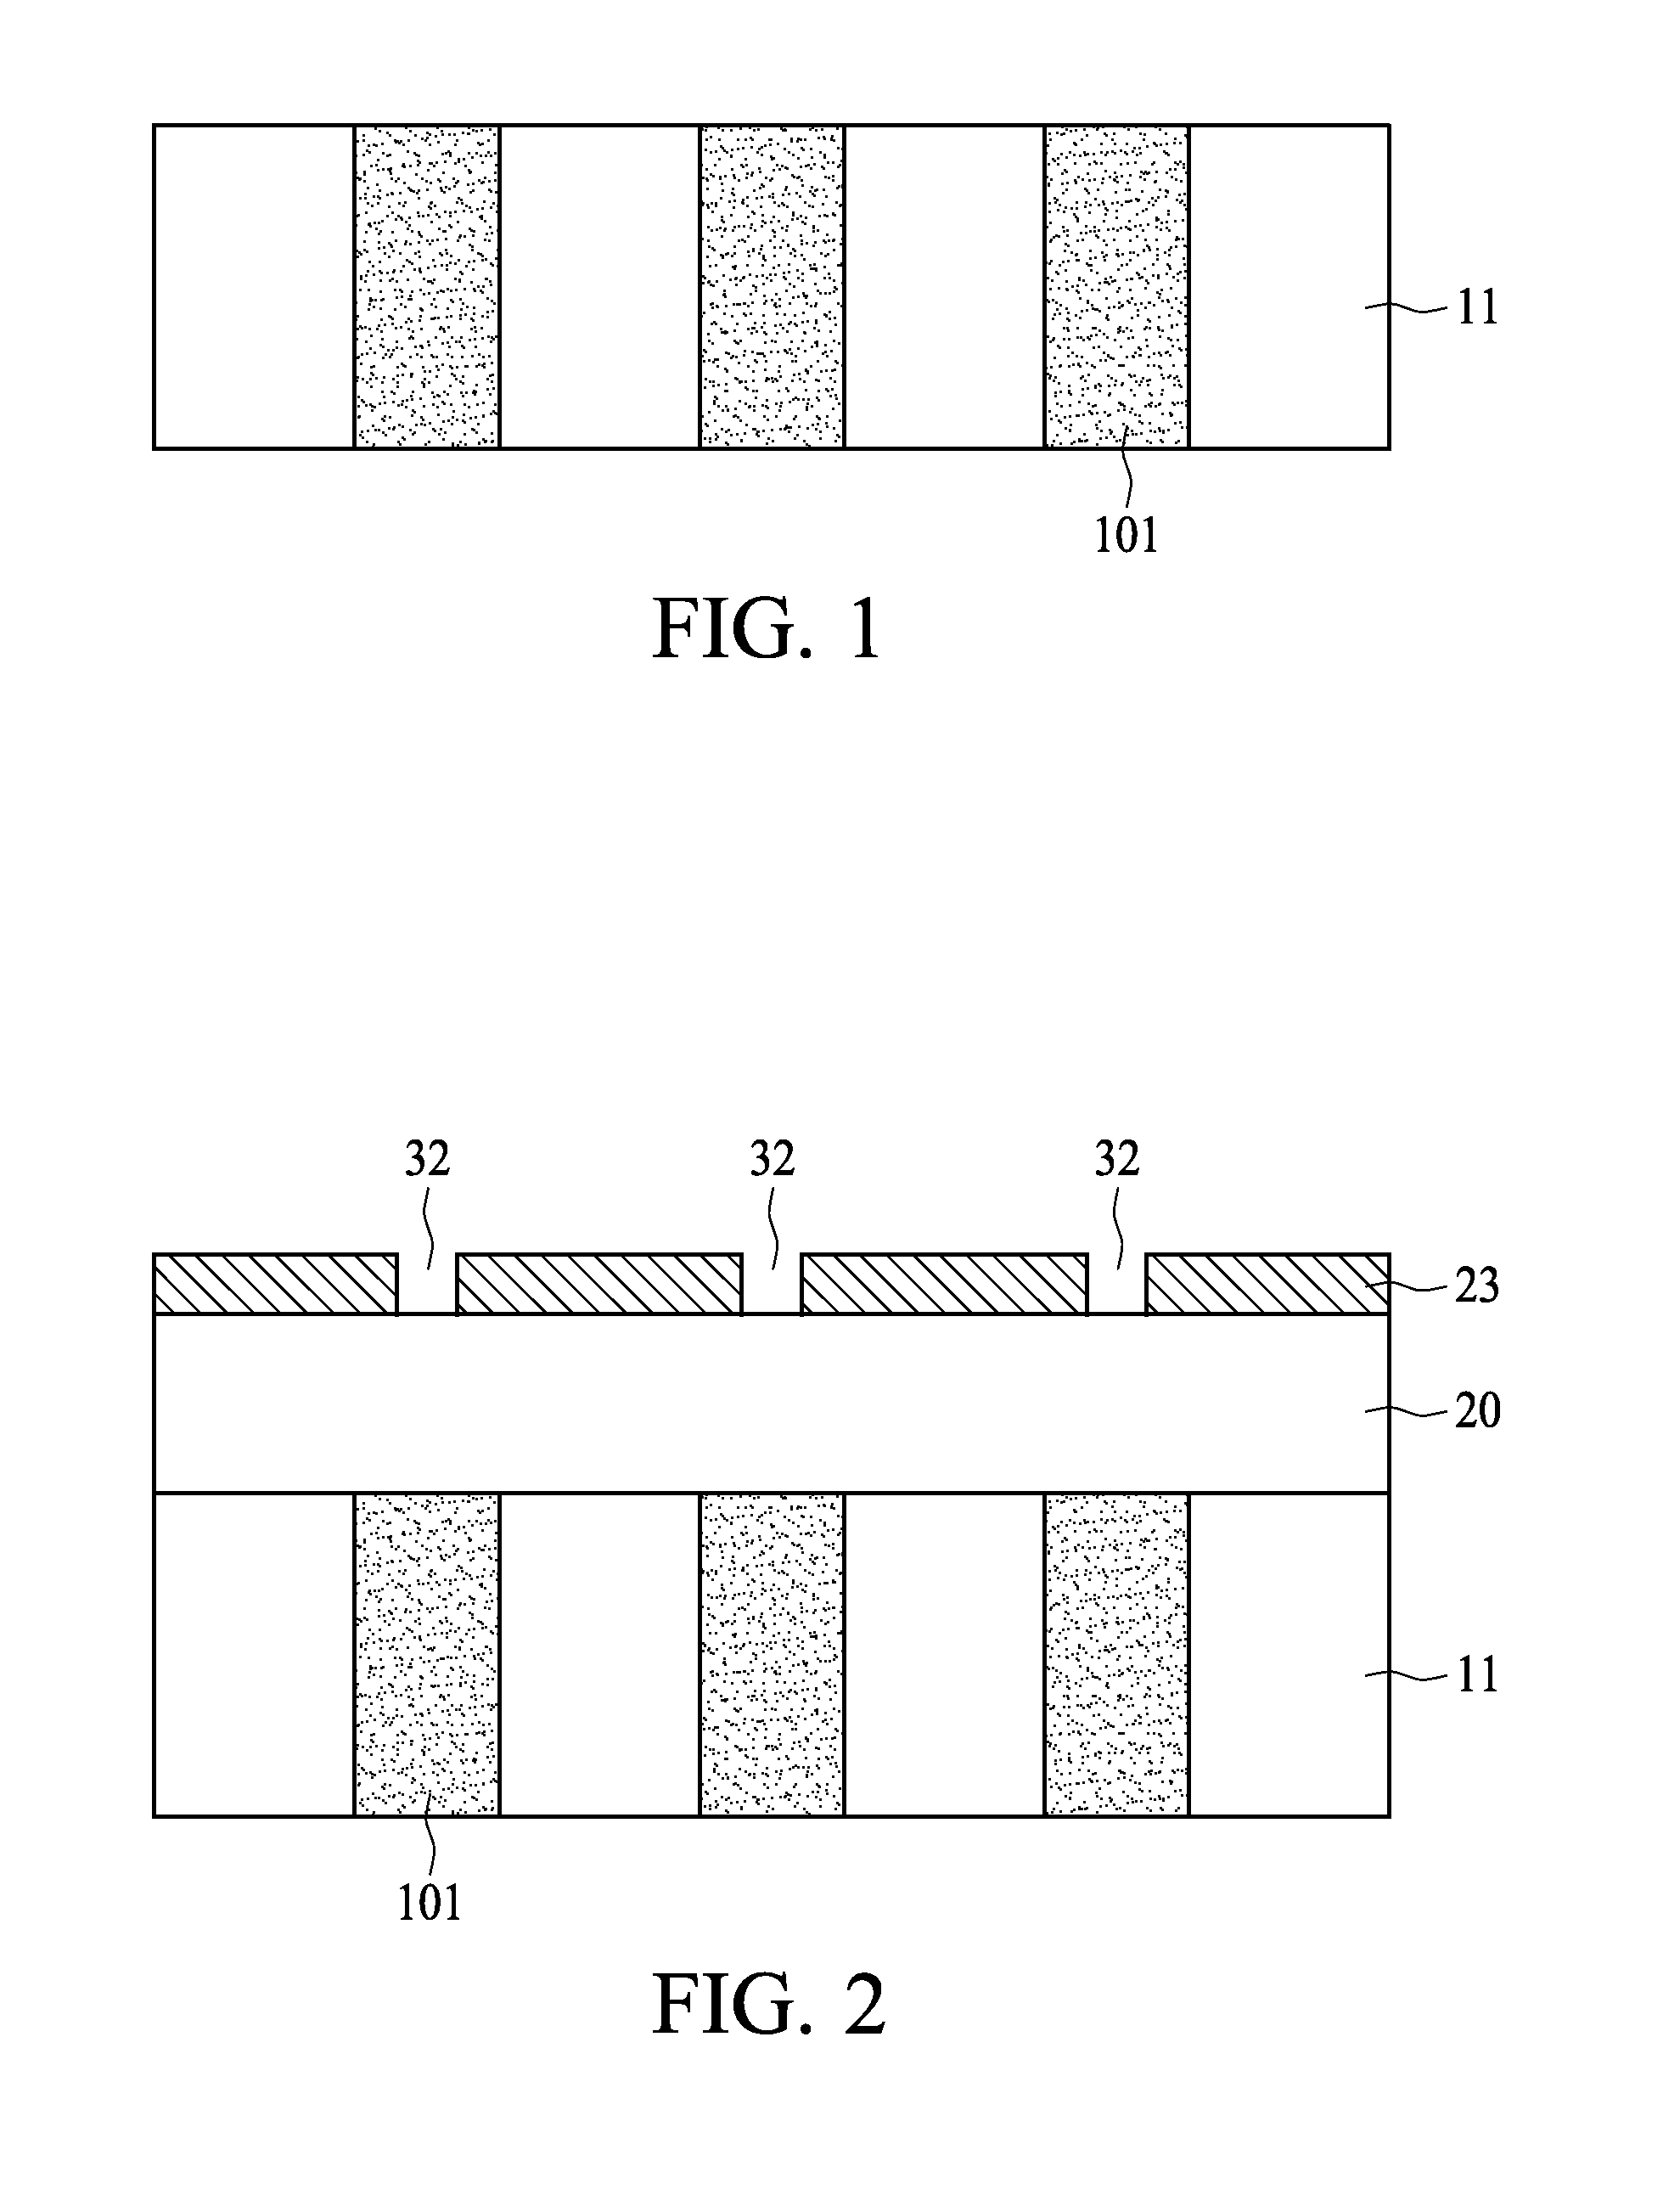 Method of forming an interconnect structure with high process margins